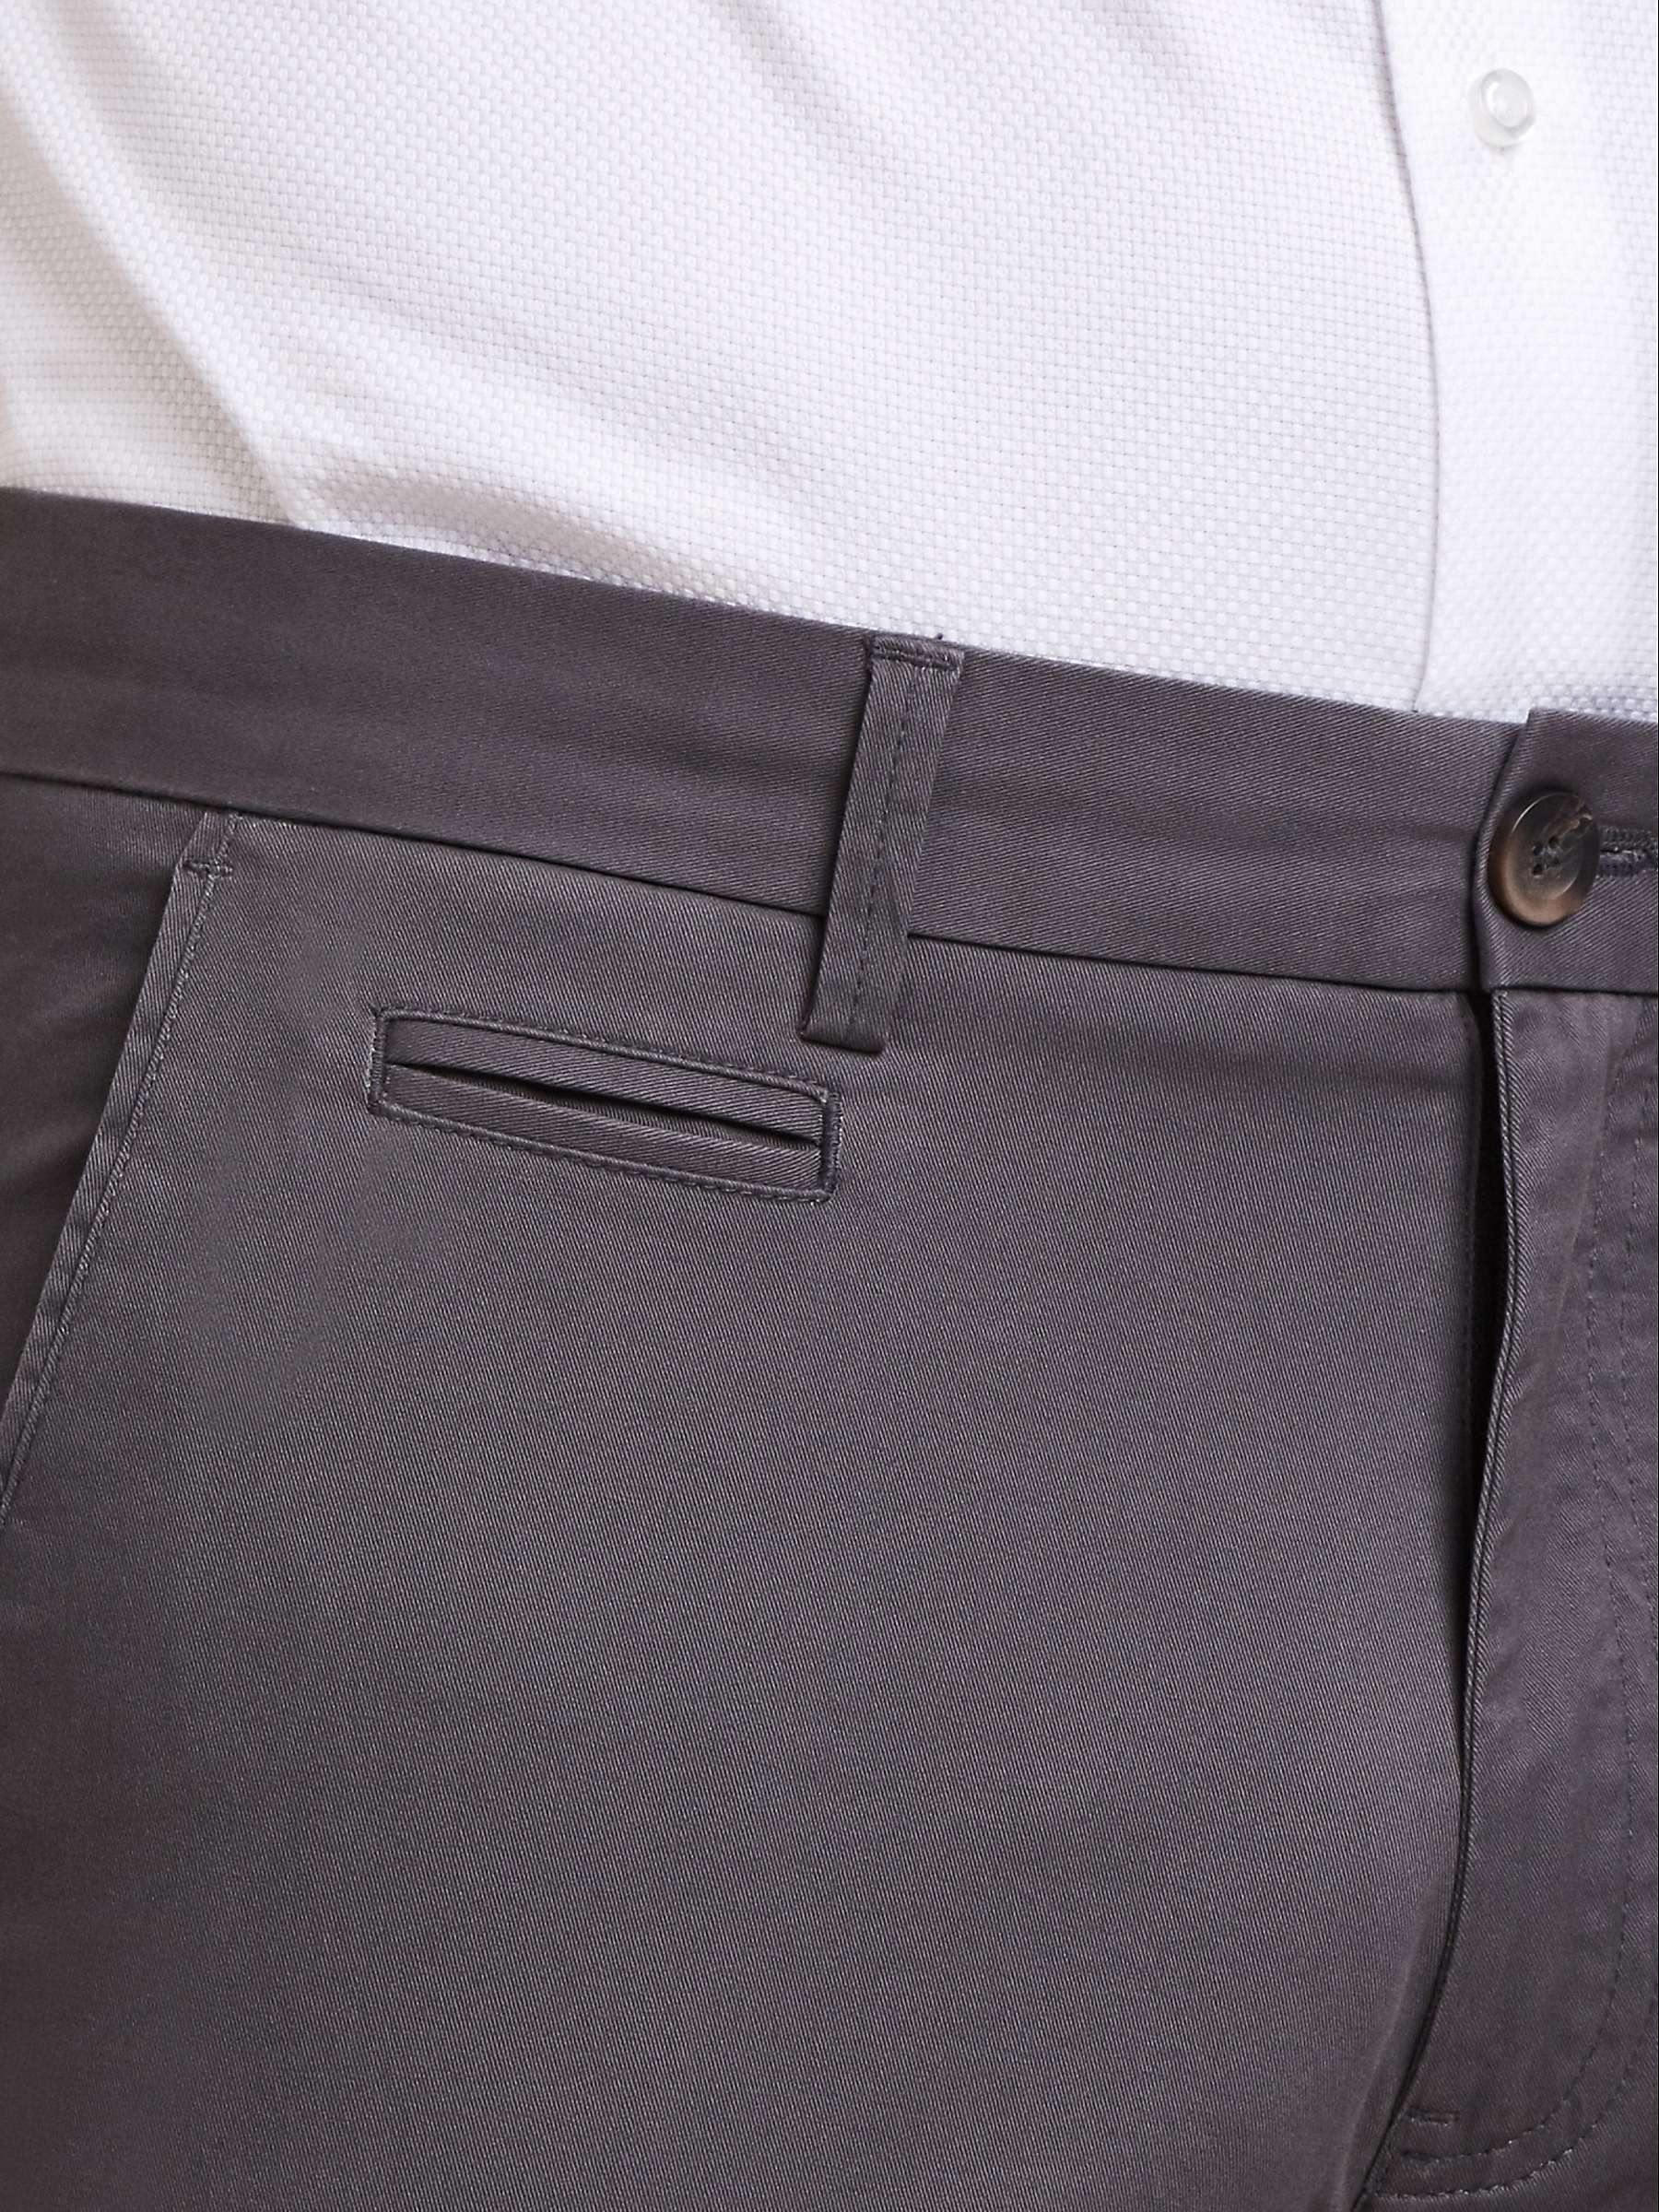 Buy Moss Tailored Stretch Chinos Online at johnlewis.com